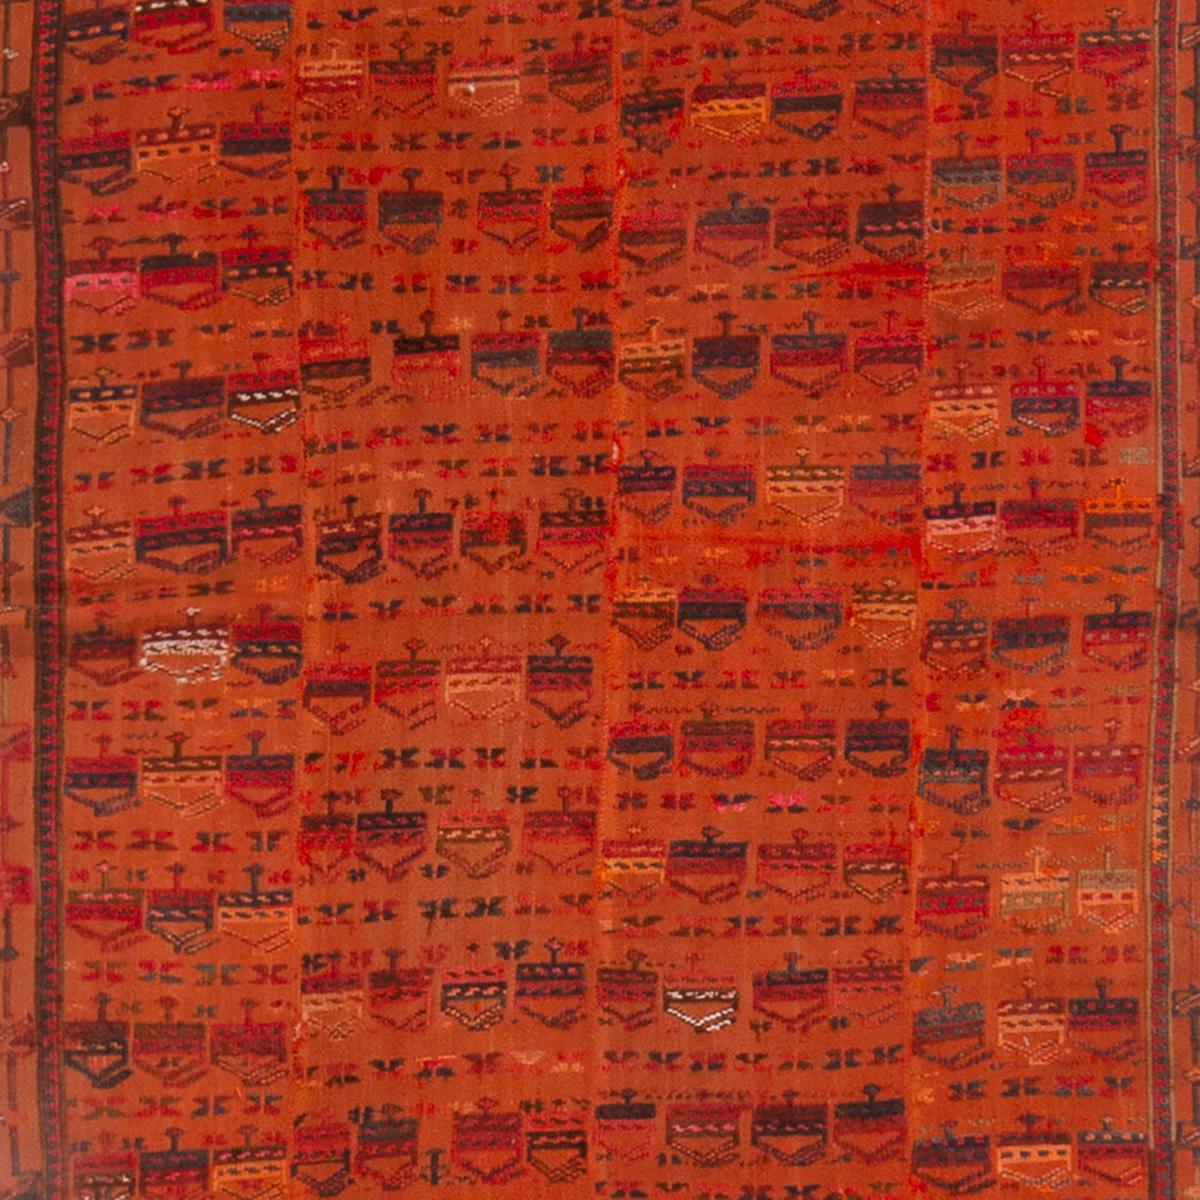 Originating from Russia in 1910, this antique traditional Verneh wool kilim is one of a select few pieces employing a distinct repetition of key marital symbolism. Flat woven in high quality wool, the deep-yet-vibrant orange field design plays host